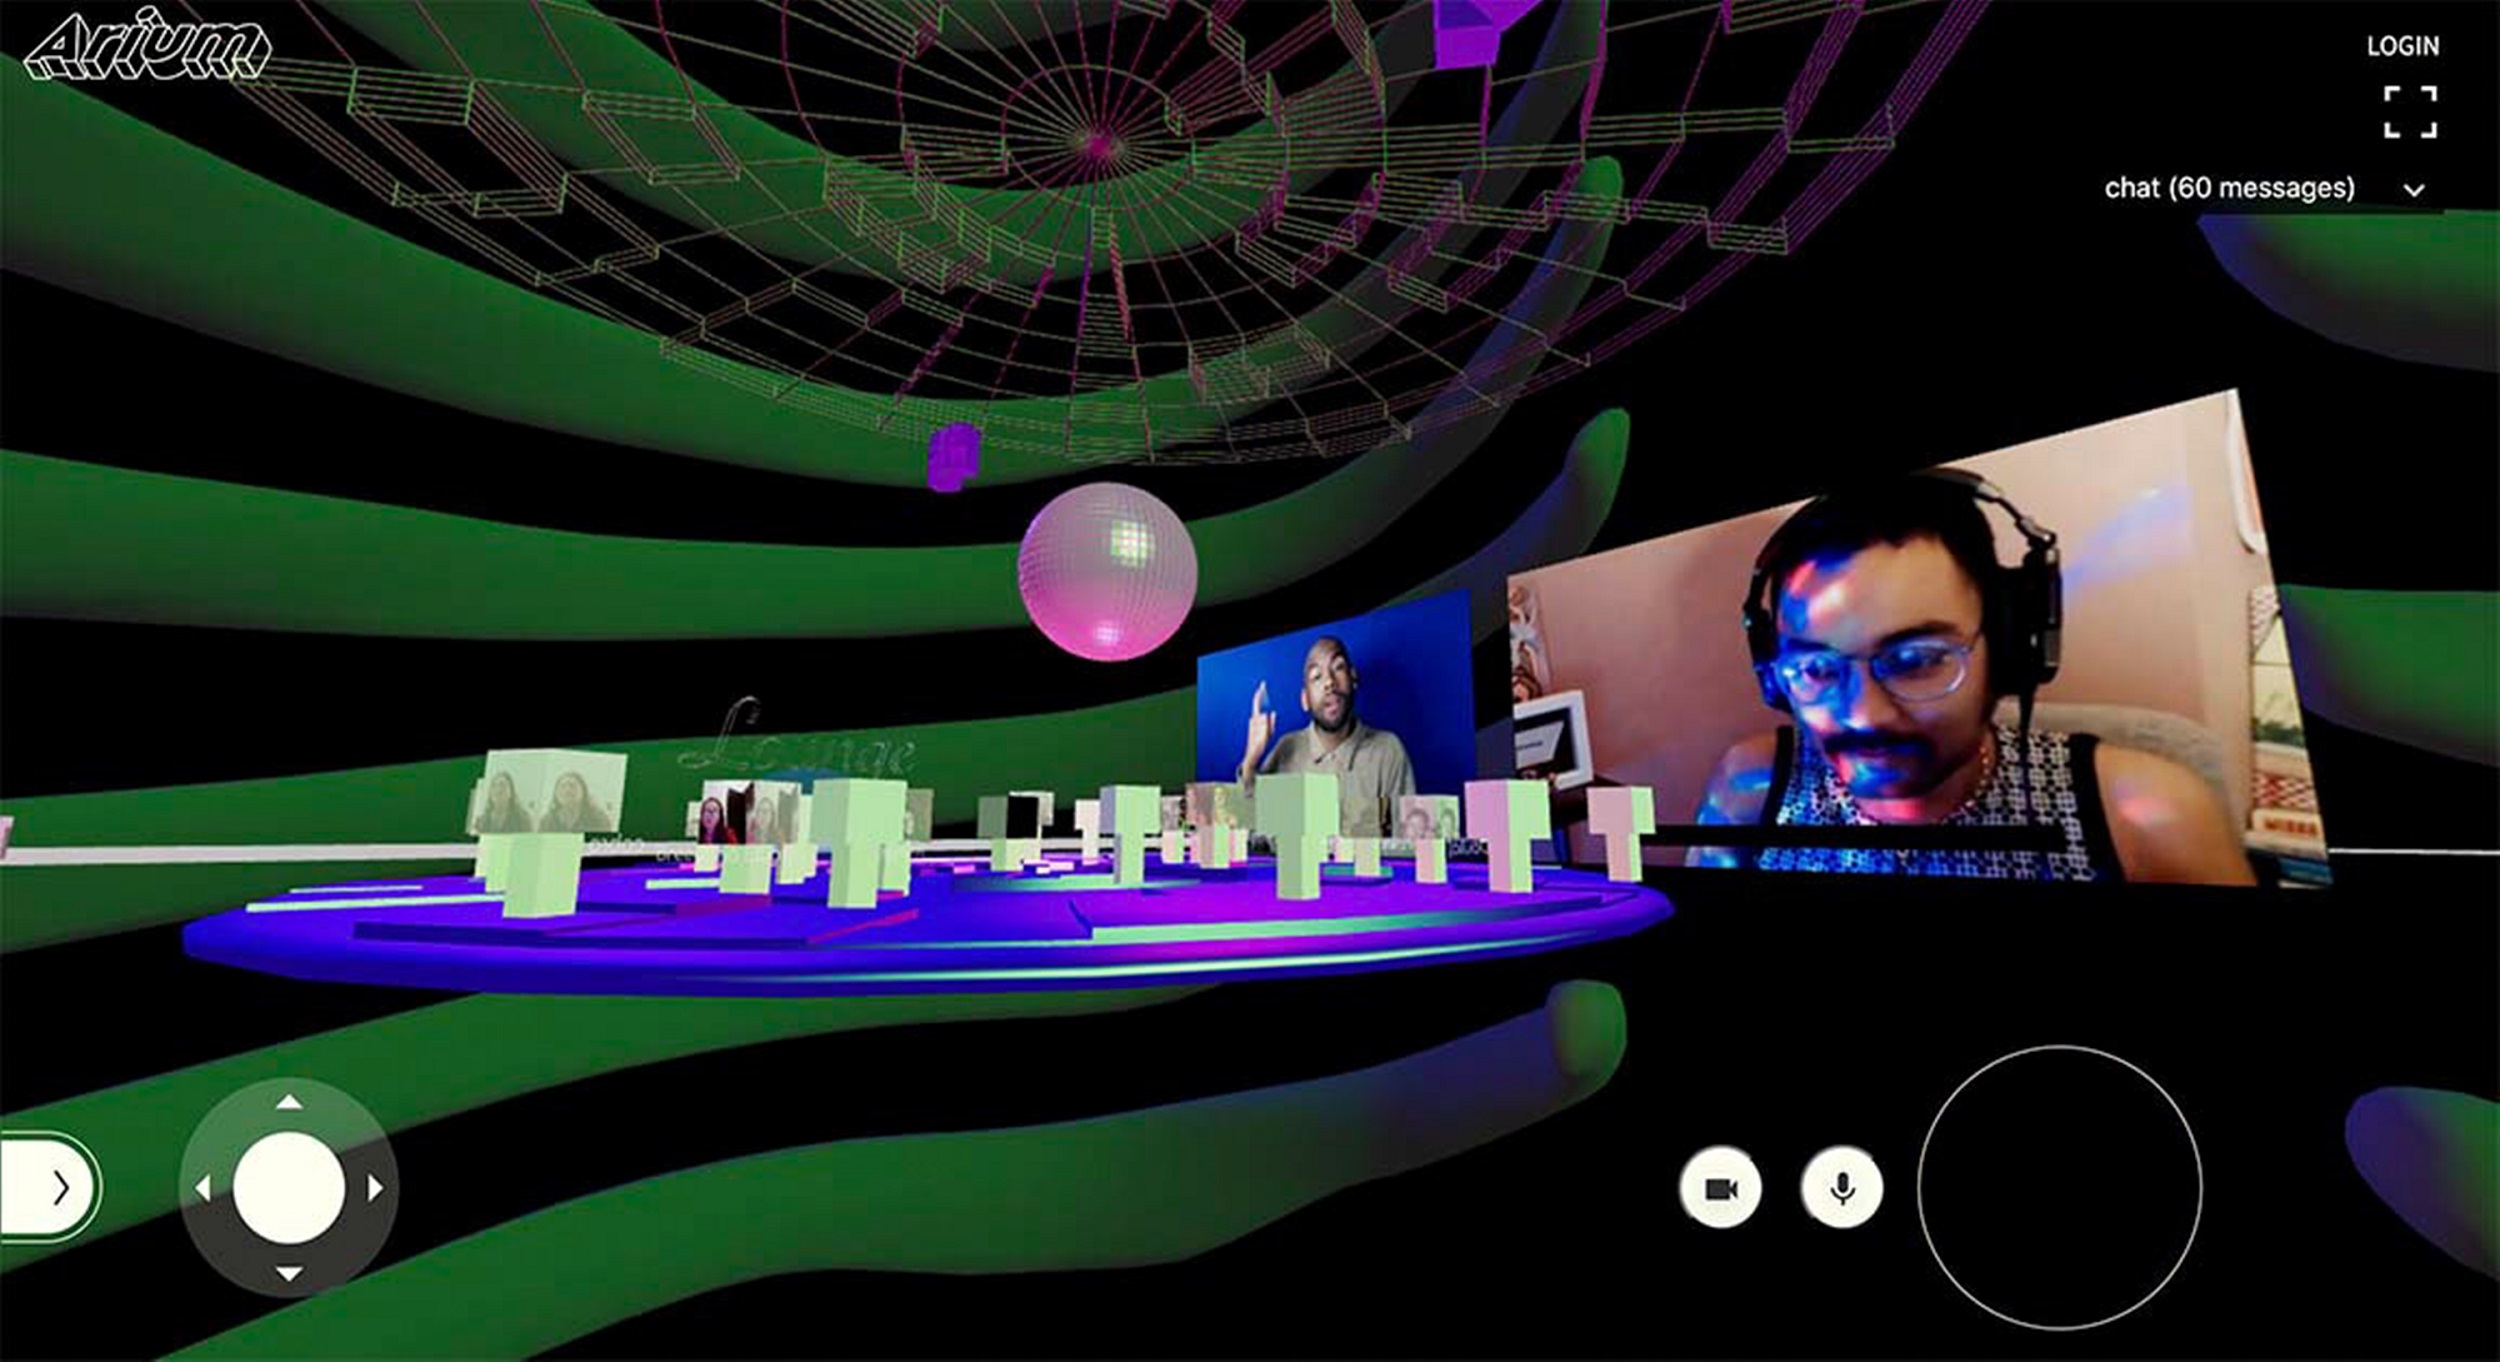 Two video planes float in the 3D digital space, side by side, and feature a person on the left mid-ASL interpretation and DJ Queer Shoulders with headphones on and party lights on their face. There is a pink disco ball in the center of the space under which virtual partygoers are gathered. Green riblike 3D elements wrap the space.